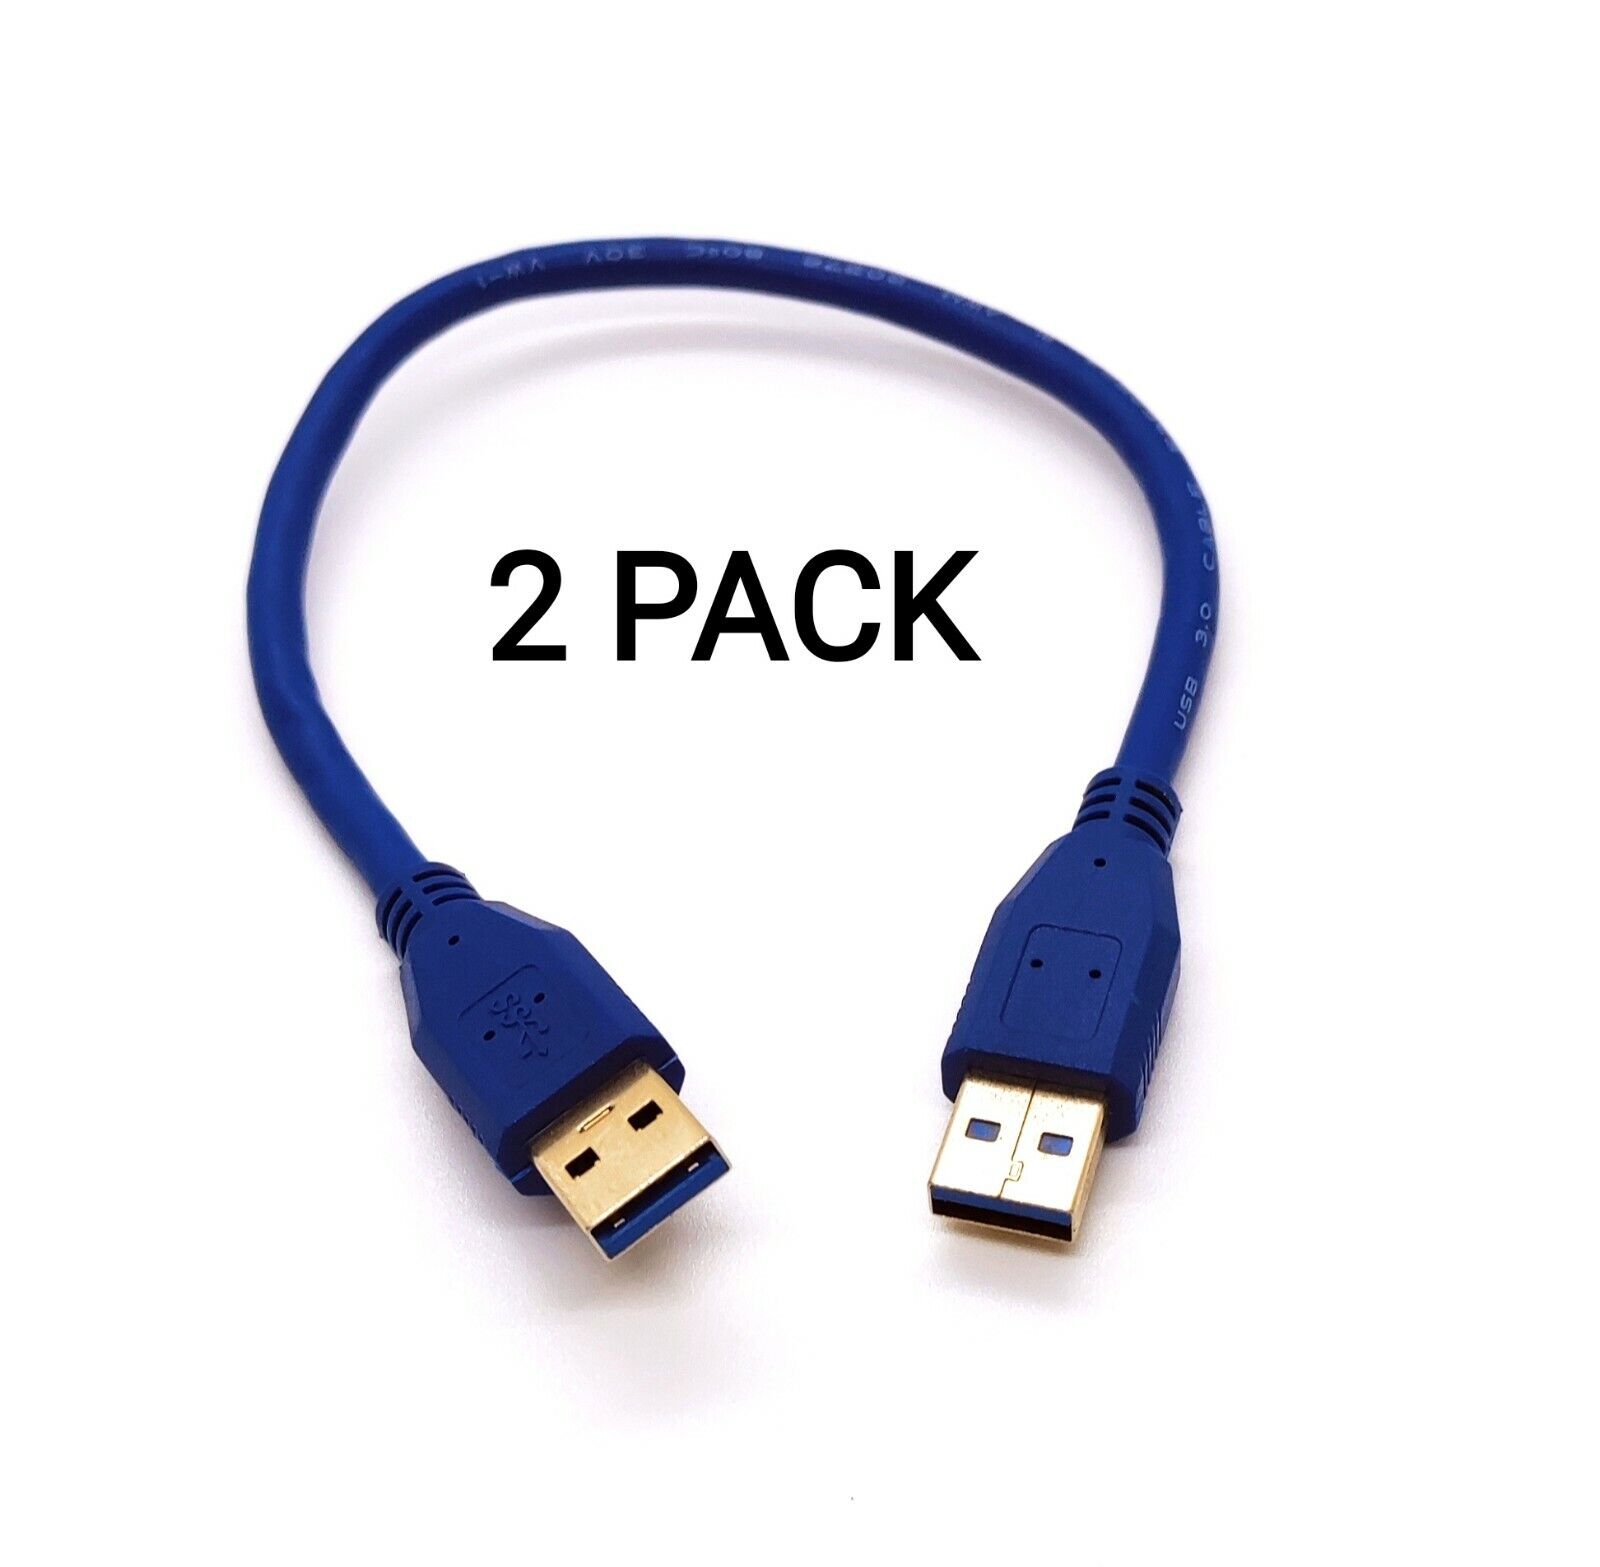 2 Pack 1Ft USB 3.0 Super Speed 4.8Gbps Gold Plate Type A Male to Male Cable Blue